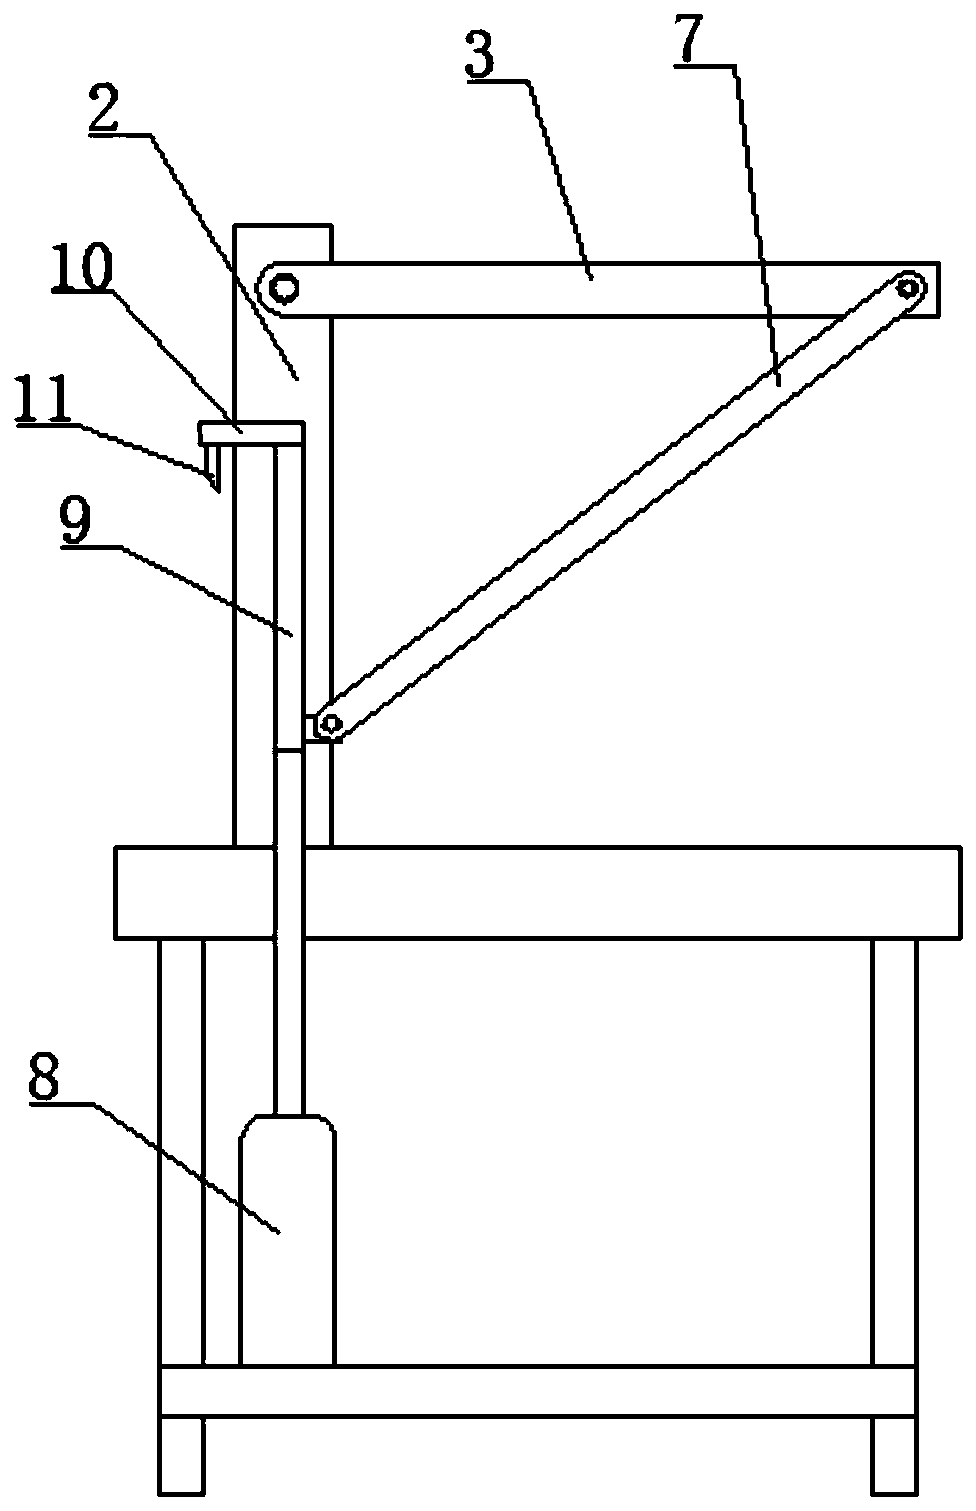 Automatic equidistant pressing and cutting mechanism for cables